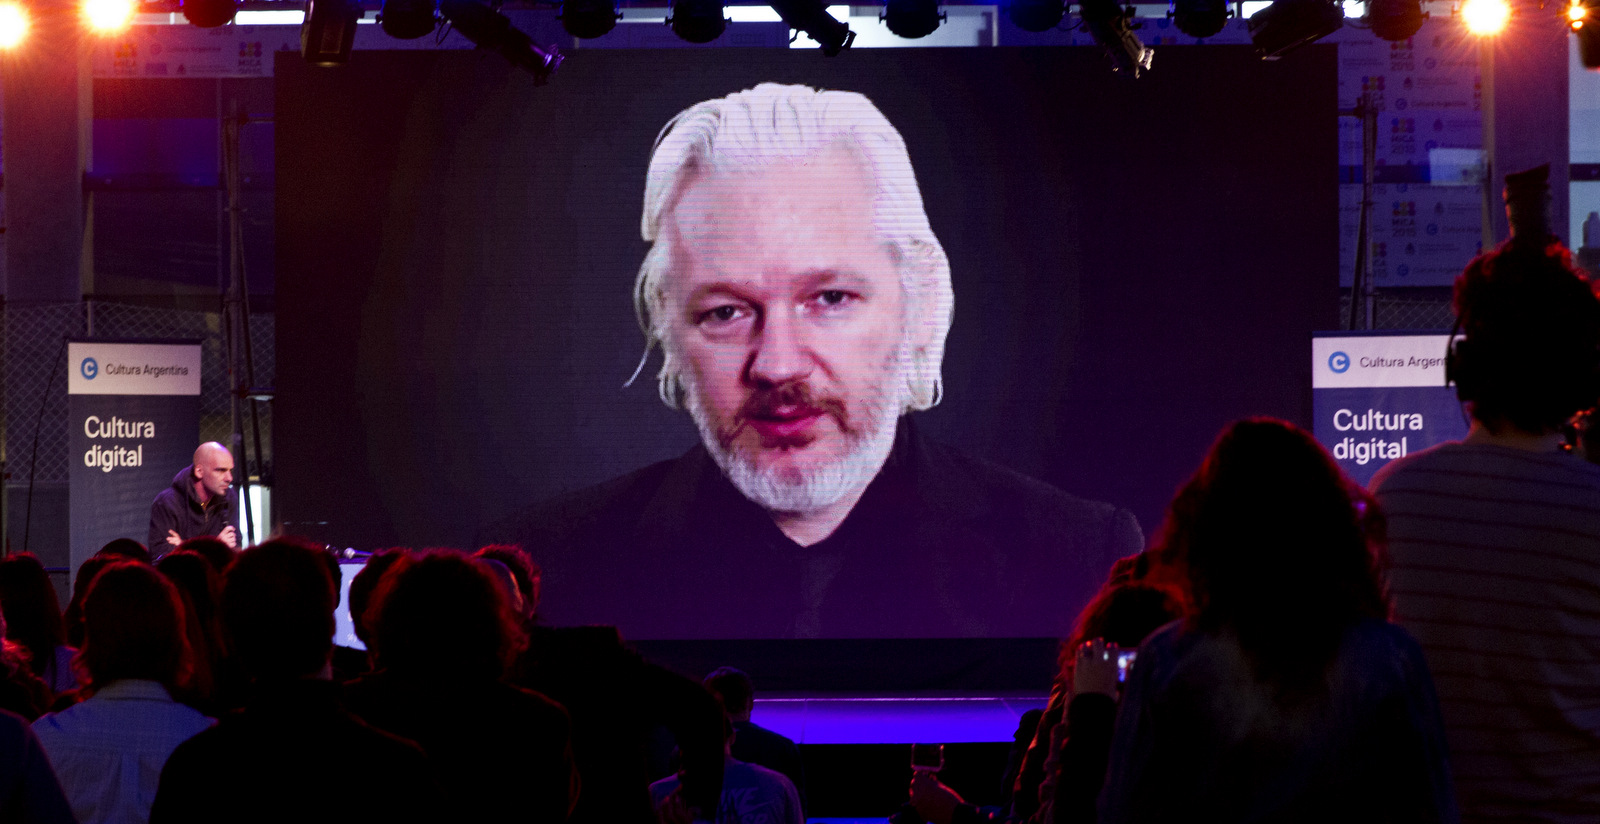 Wikileaks founder Julian Assange appears via teleconference at the Digital Culture Forum, organized by Argentina's Ministry of Culture, October 15, 2015. (Photo: Romina Santarelli/Flickr)